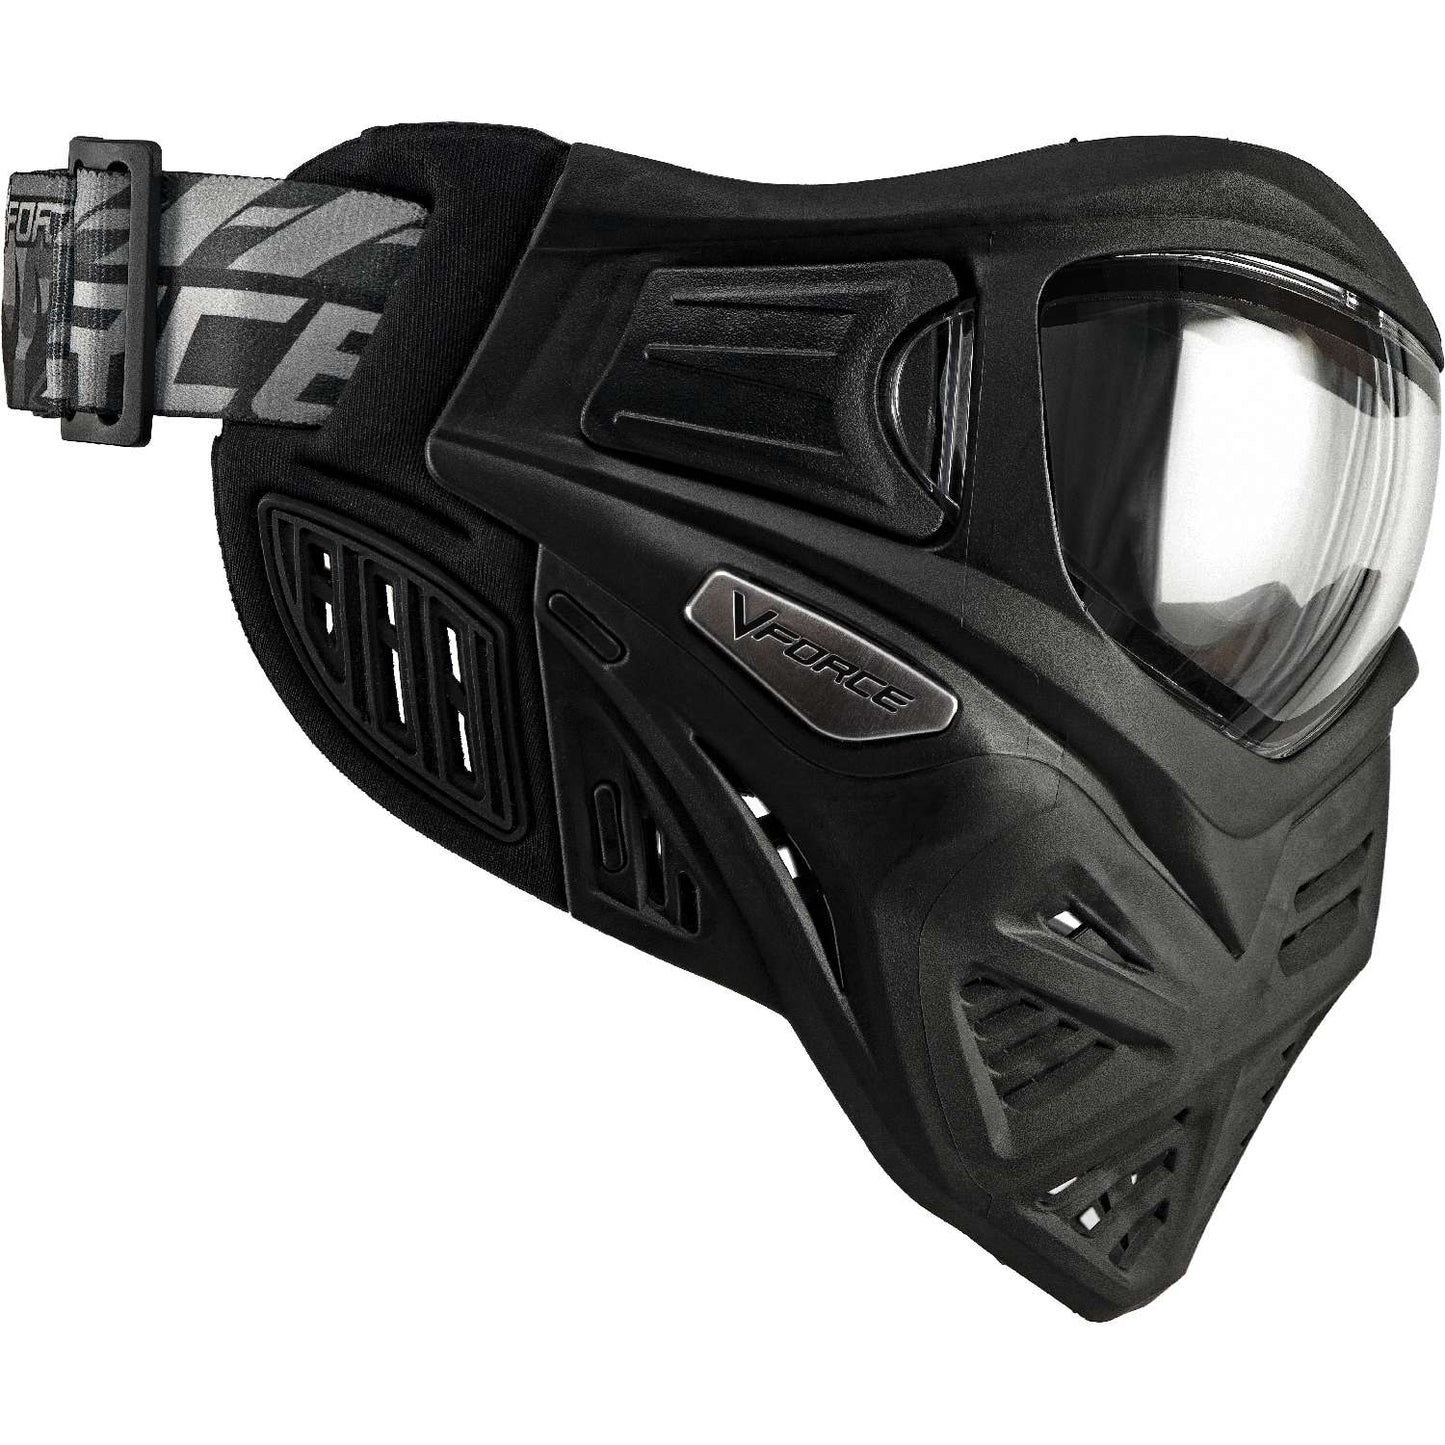 V-Force Grill 2.0 Paintball Goggle - Thermal Clear Lens - Black/Black